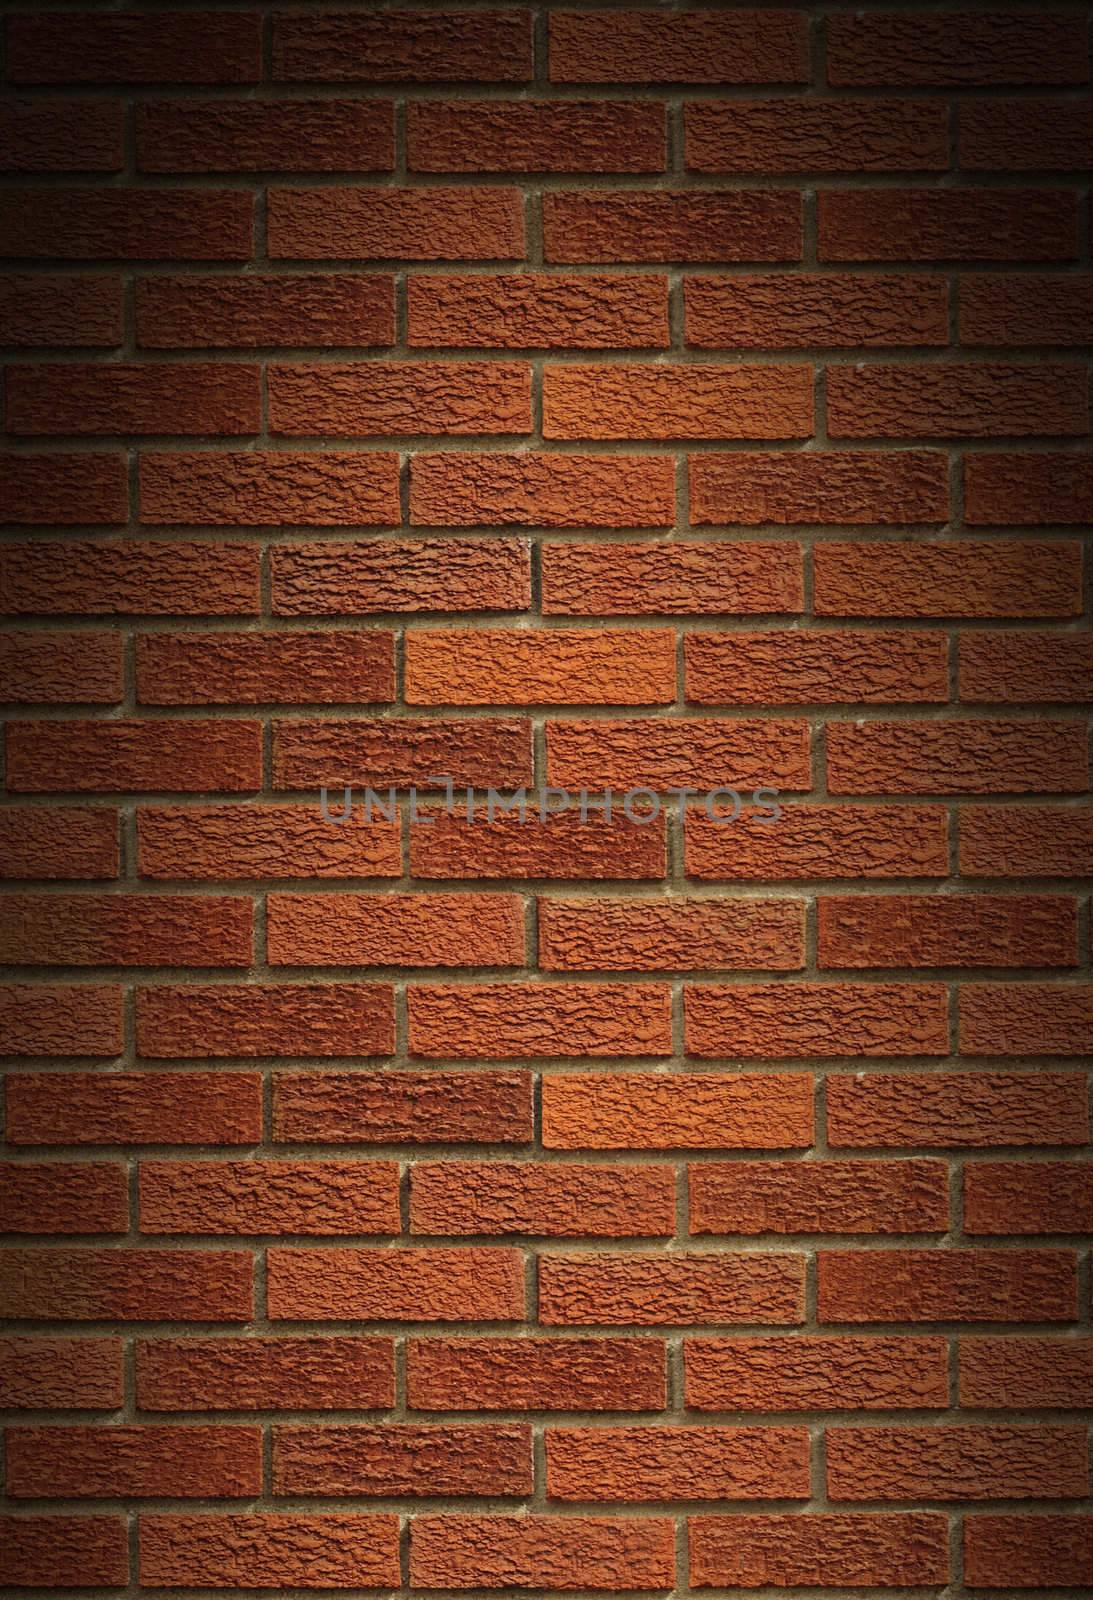 Red brick wall background lit dramatically from above